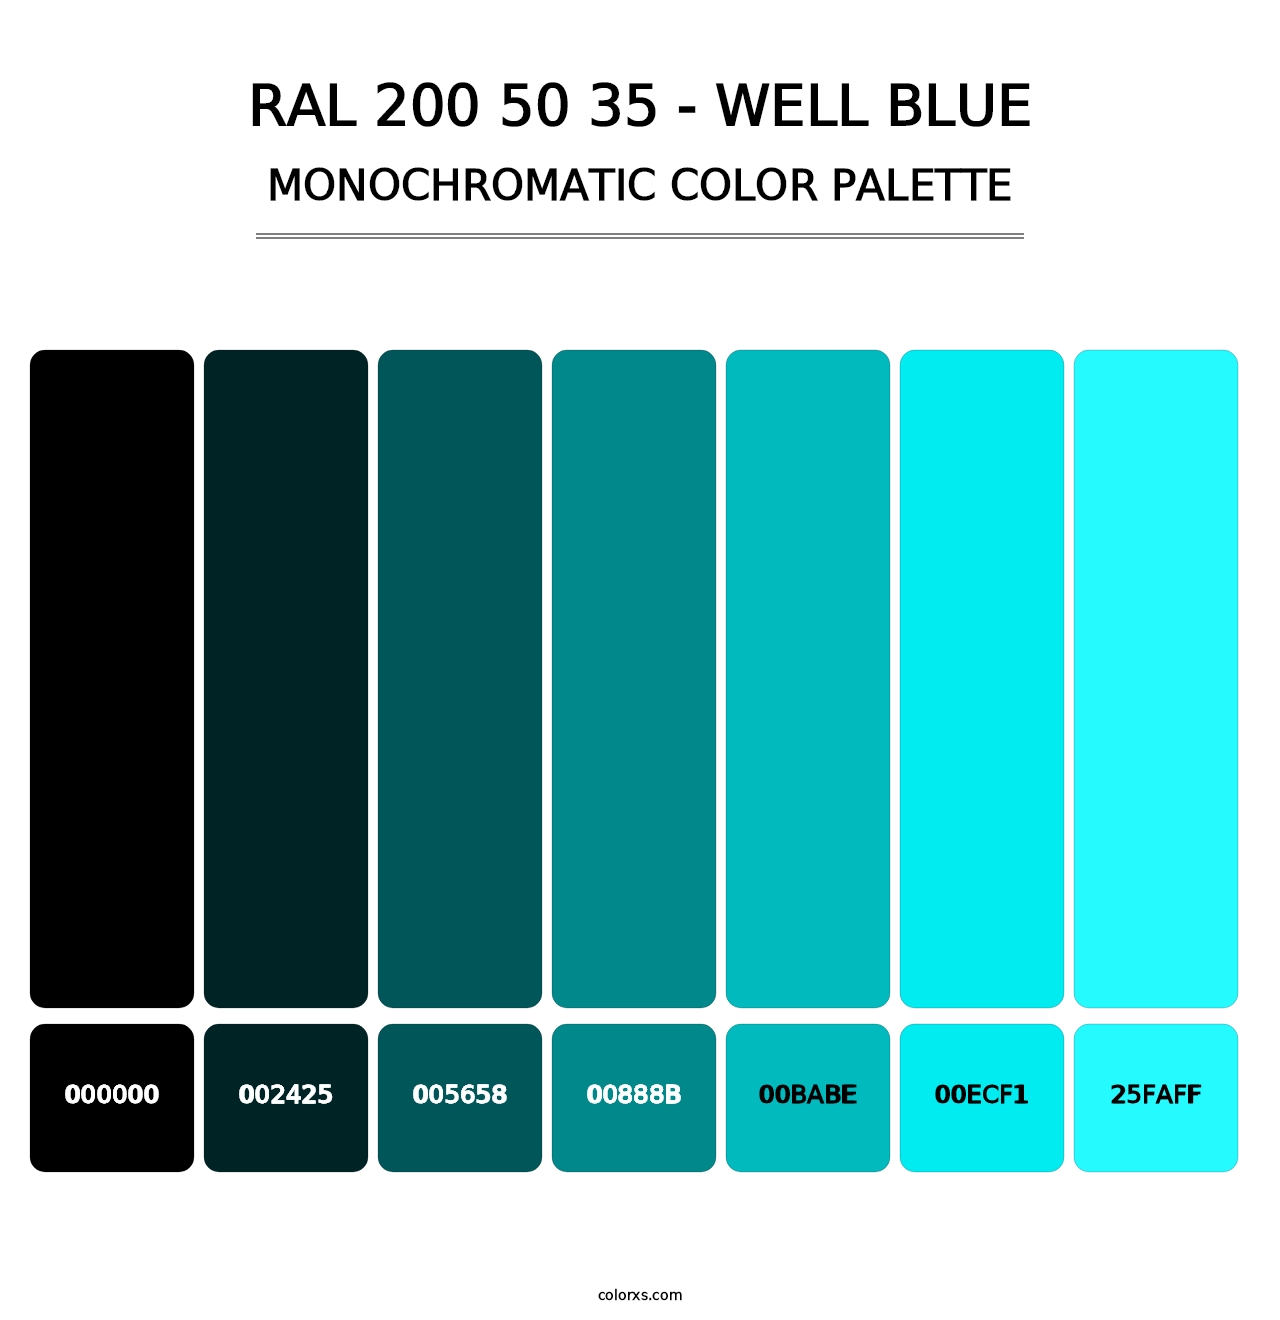 RAL 200 50 35 - Well Blue - Monochromatic Color Palette